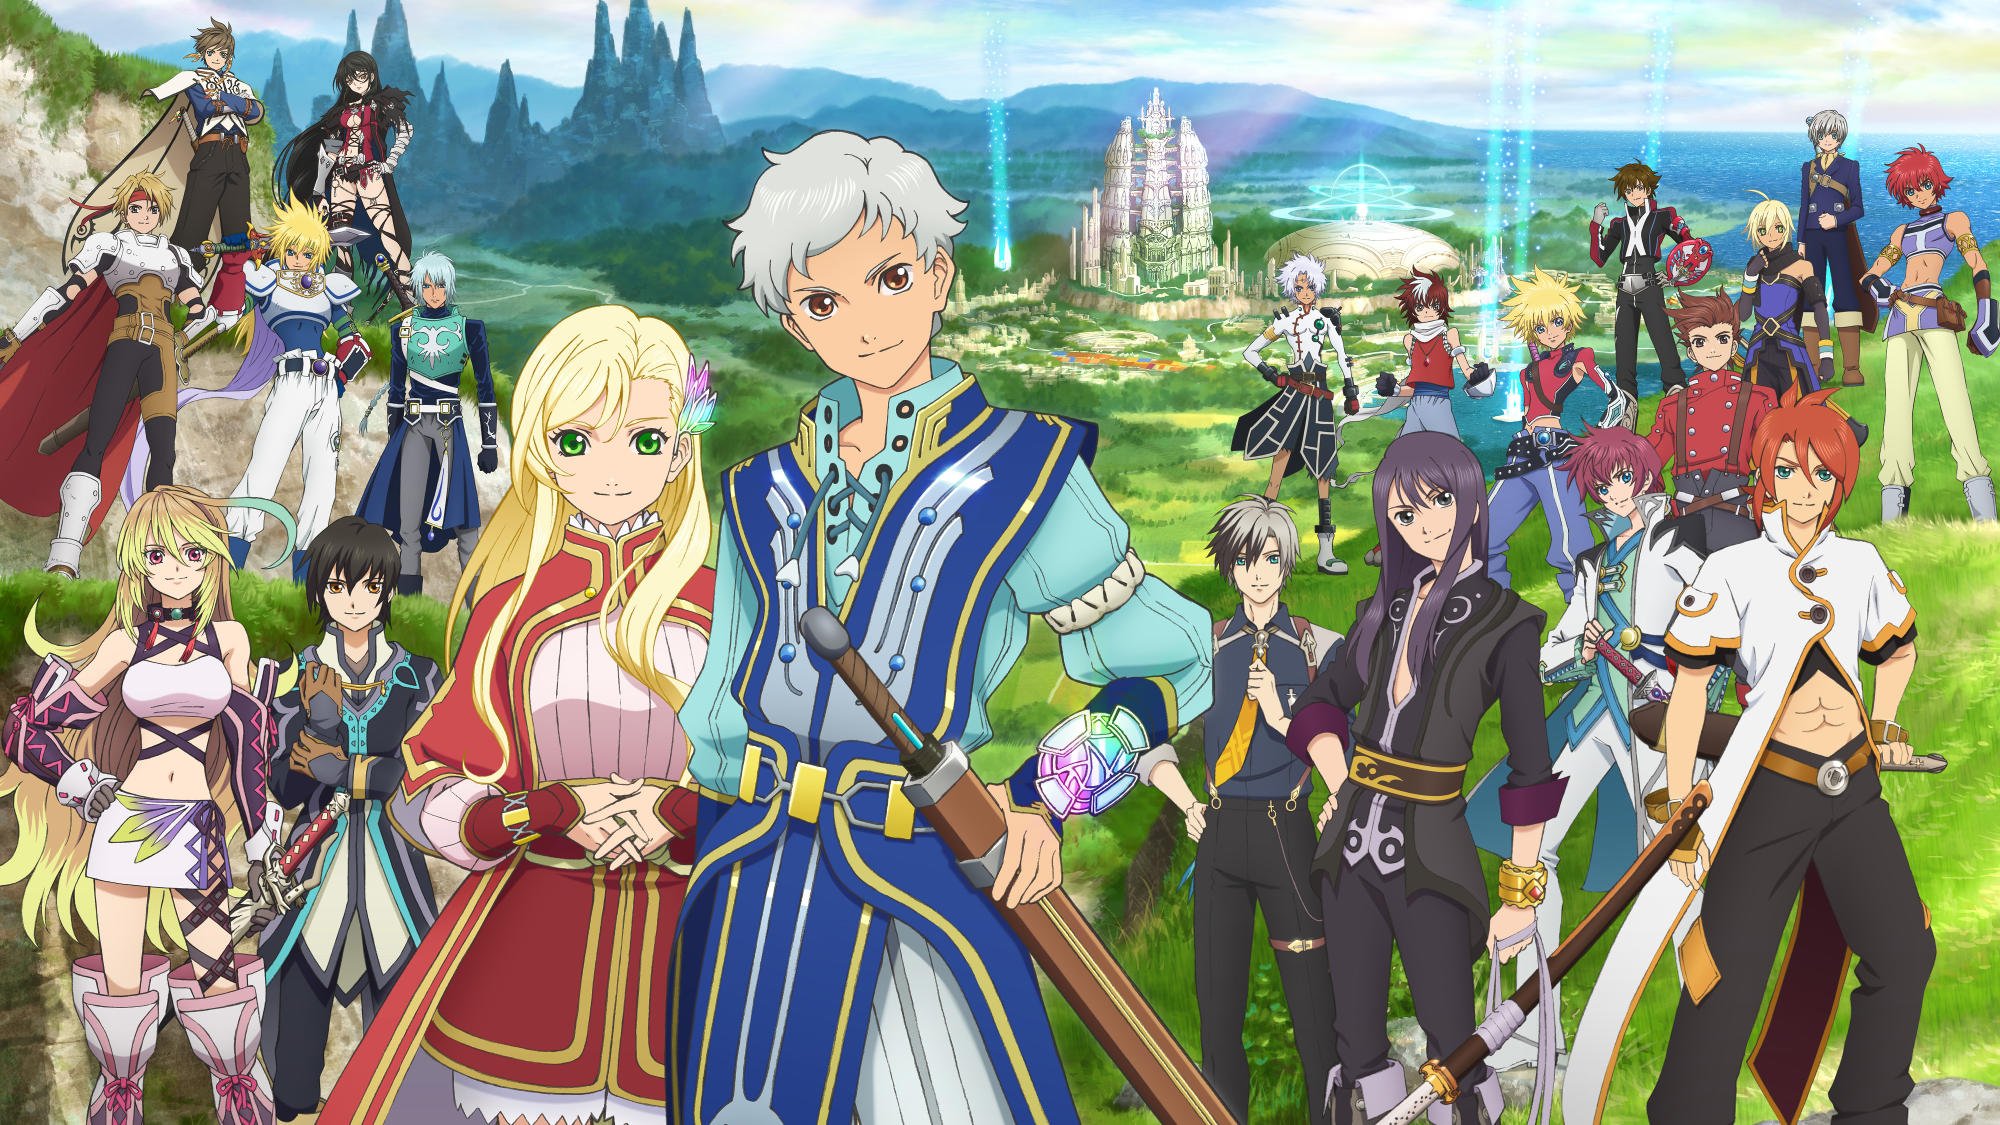 Tales of the Rays from Bandai Namco Coming to Mobile this Summer